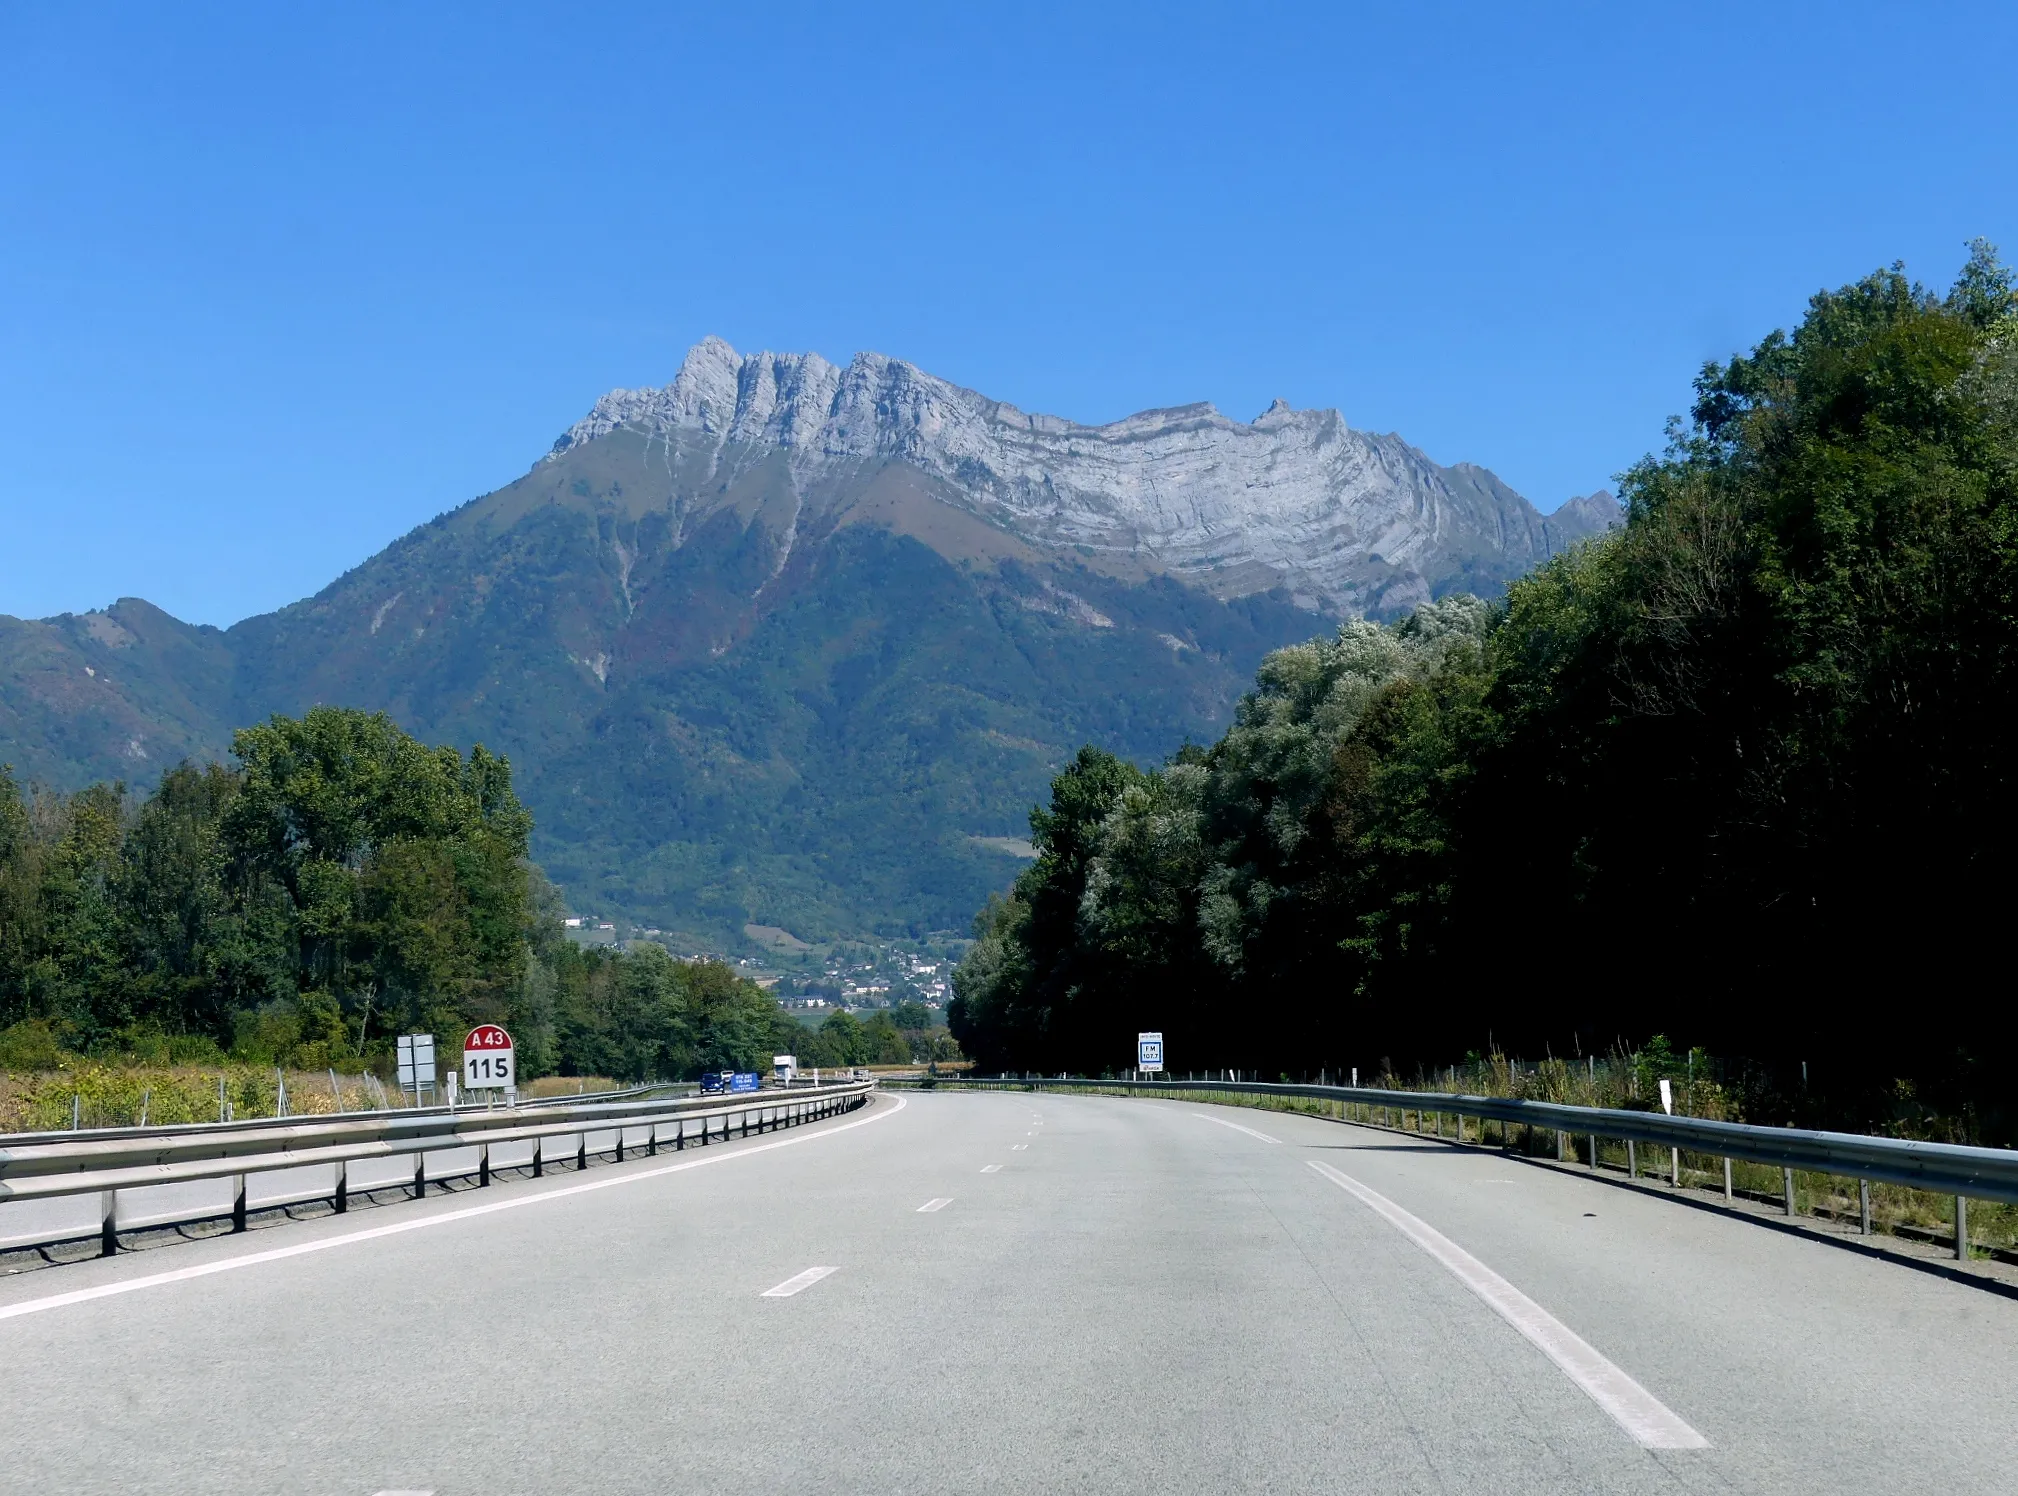 Photo showing: Sight, in Planaise of the A43 motorway in the direction of the east (to Italy), in Savoie, France. At the background can be seen the Arclusaz mountain.